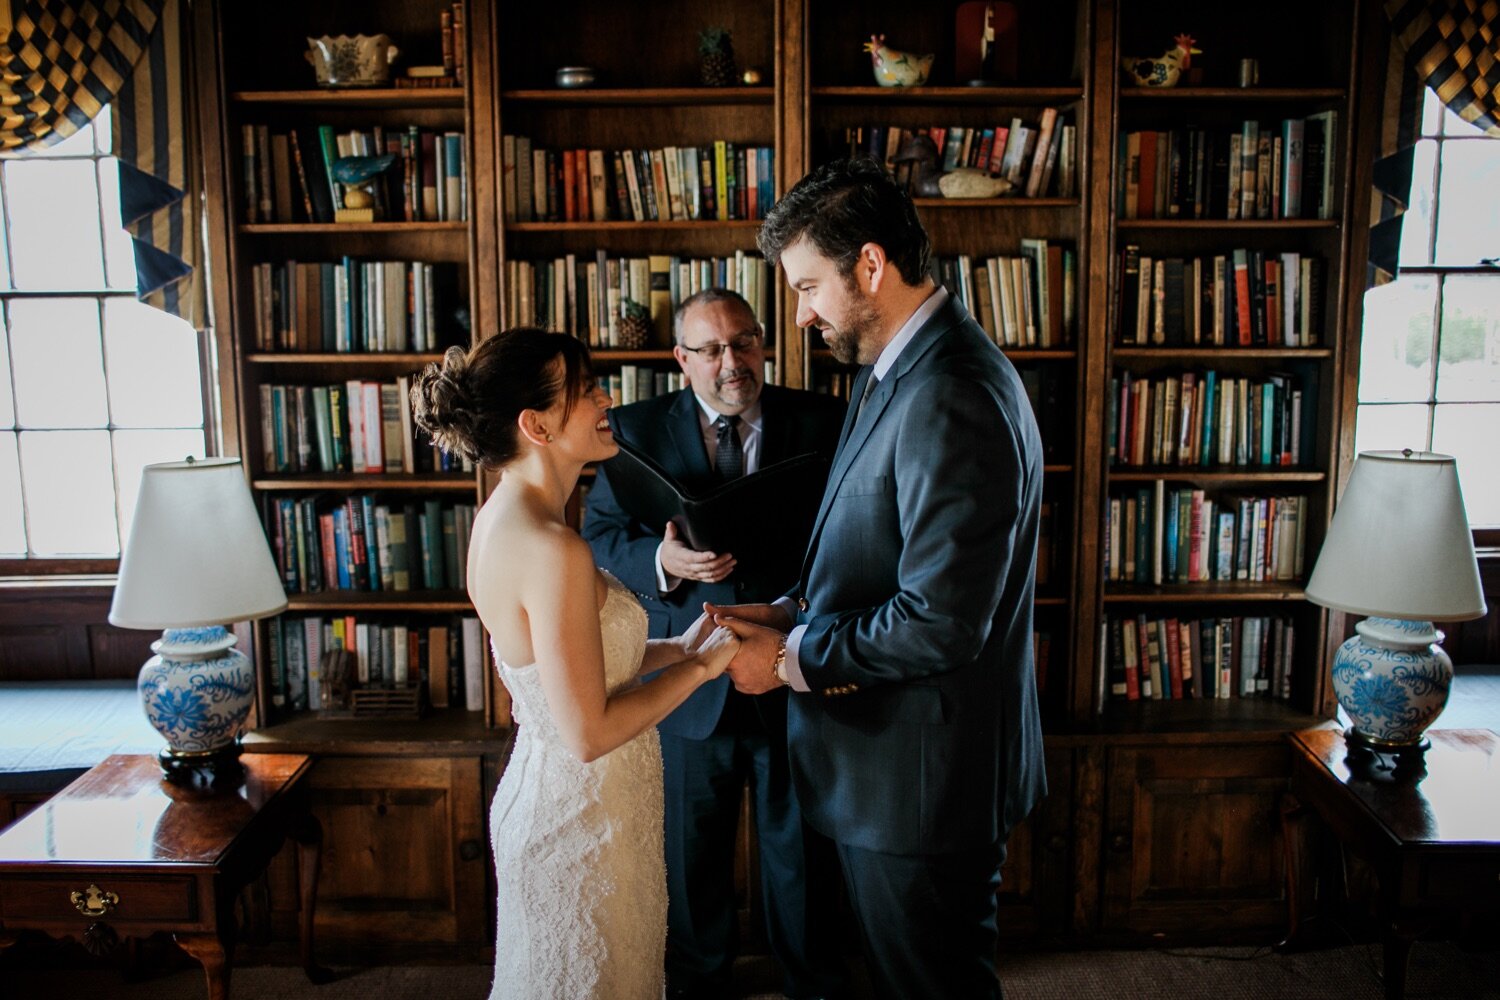 04_Intimate elopement ceremony at the Beekman Arms in Rhinebeck NY.jpg